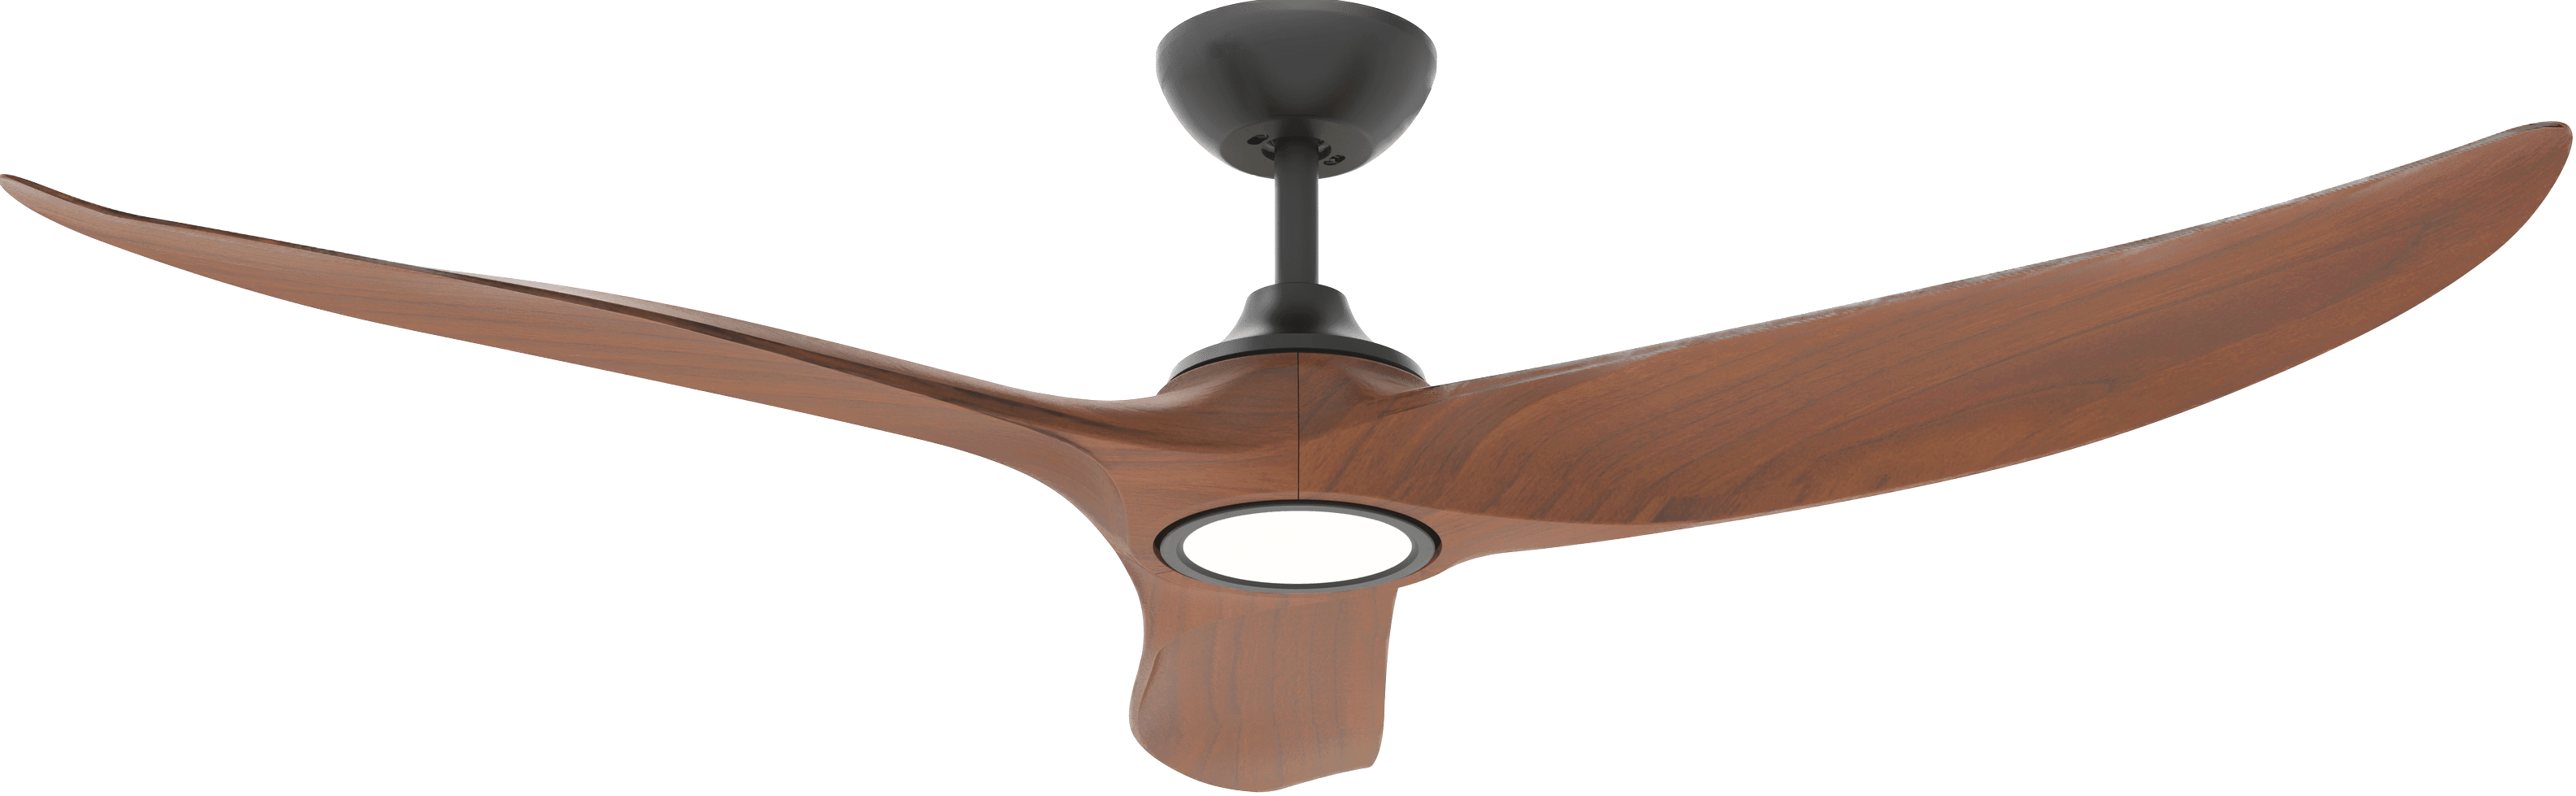 Hunter Pacific Ceiling Fans 48" / Black/Koa Evolve EC/DC Motor Ceiling Fan with Light & Remote by Hunter Pacific Lights-For-You E362L